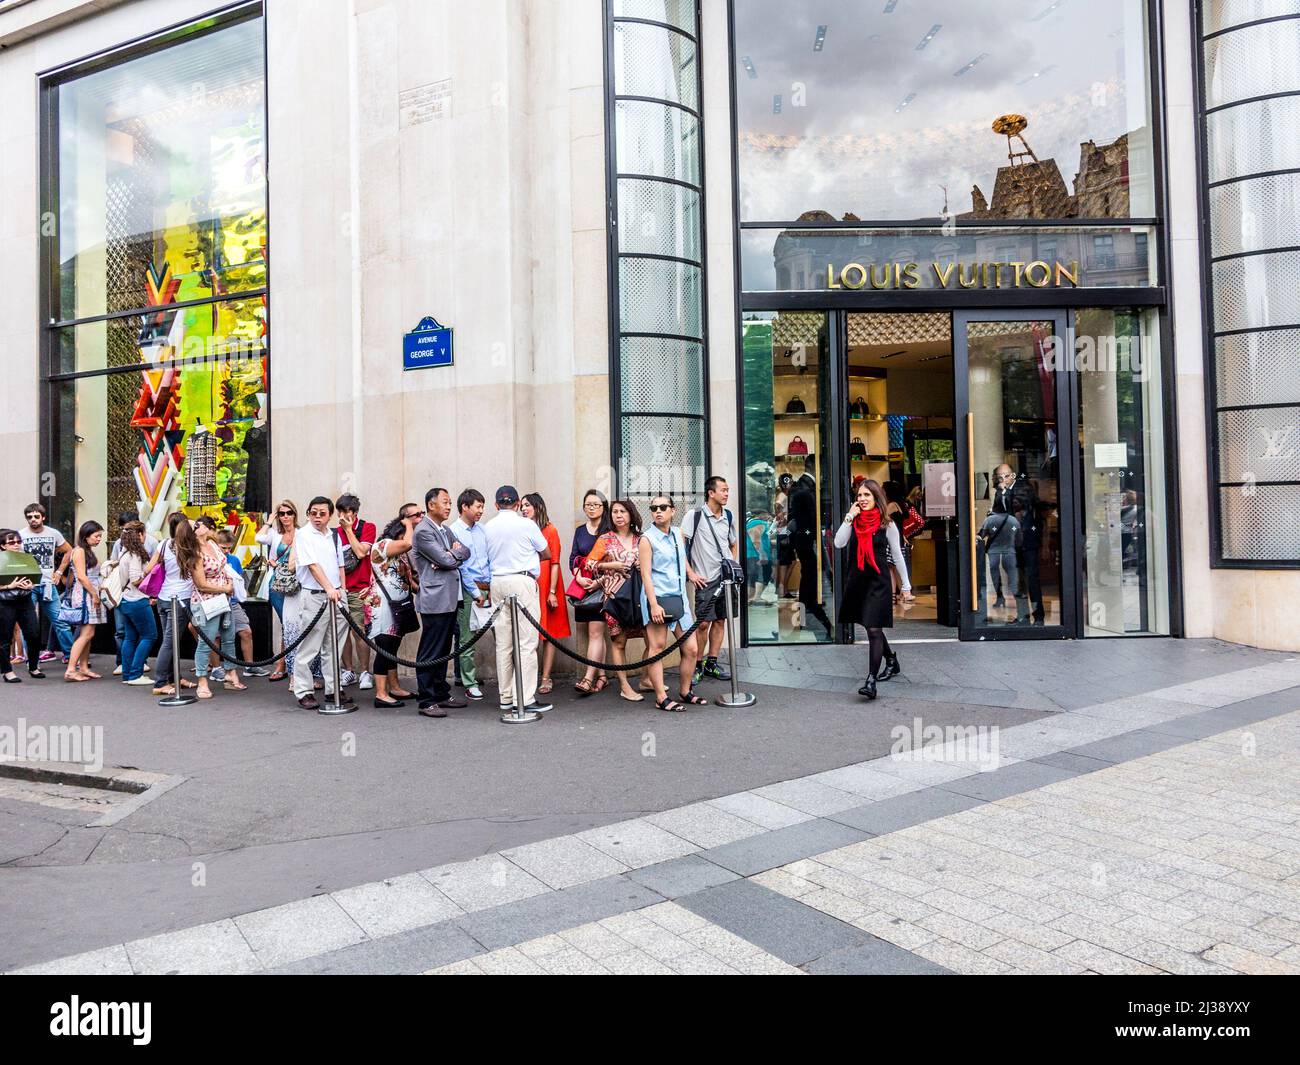 PARIS, FRANCE - JUNE 12, 2015: people queue up in front of Louis Vuitton shop at champs elysees for shopping. Stock Photo